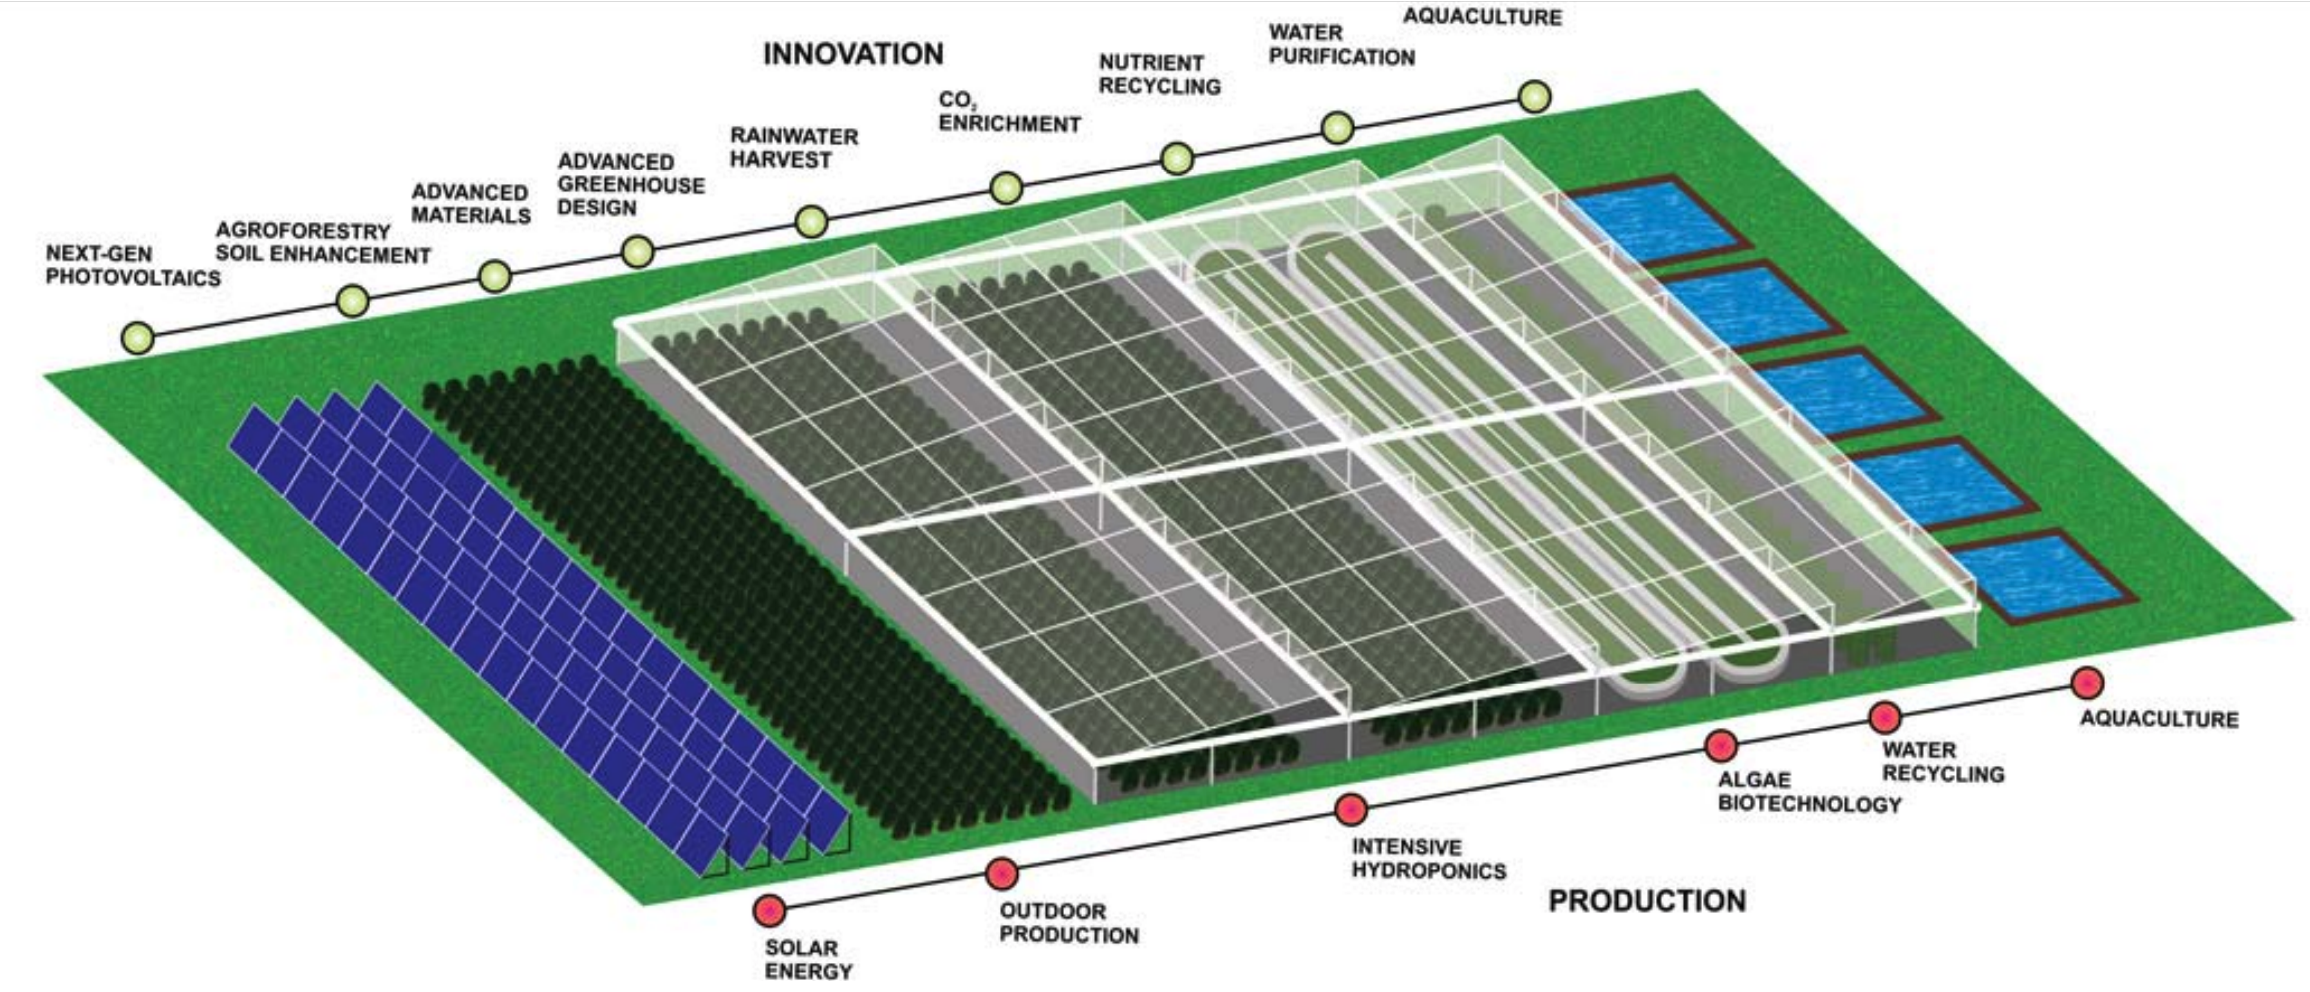 The Integrated Bioeconomy vision: a highly efficient, controlled biosphere and protected cropping system